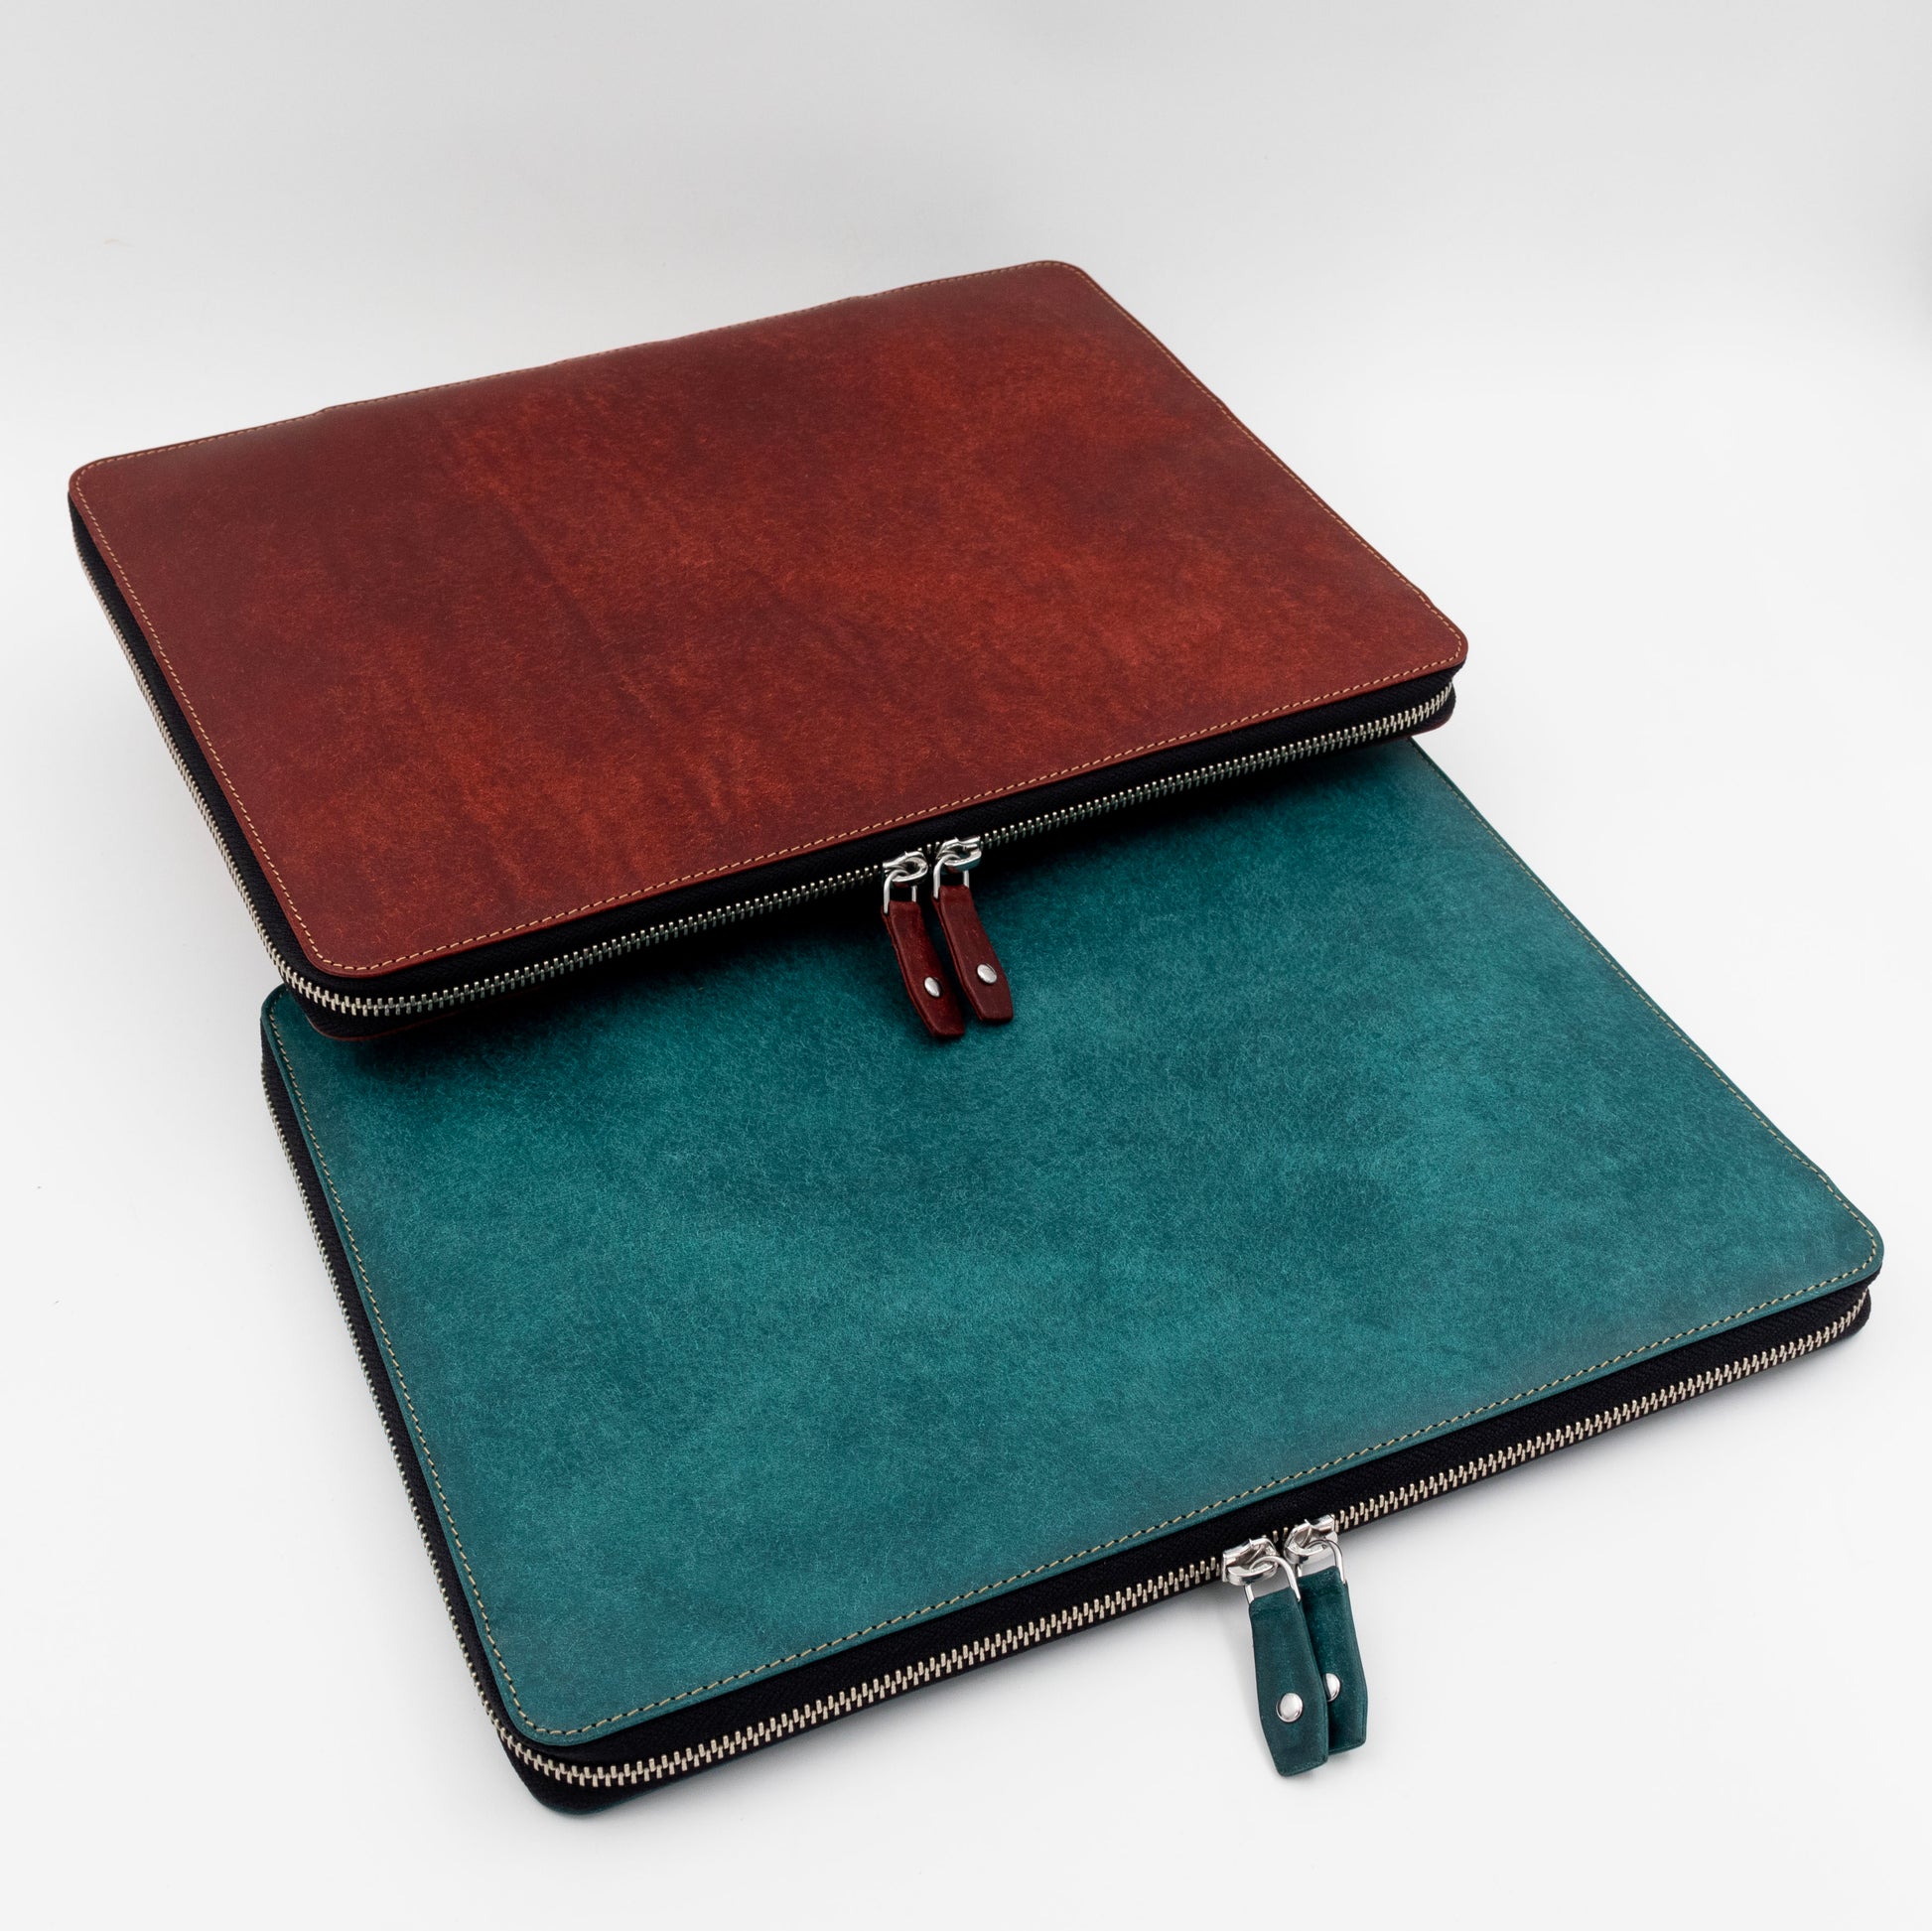 MacBook case with zippers in vegetable tanned leather